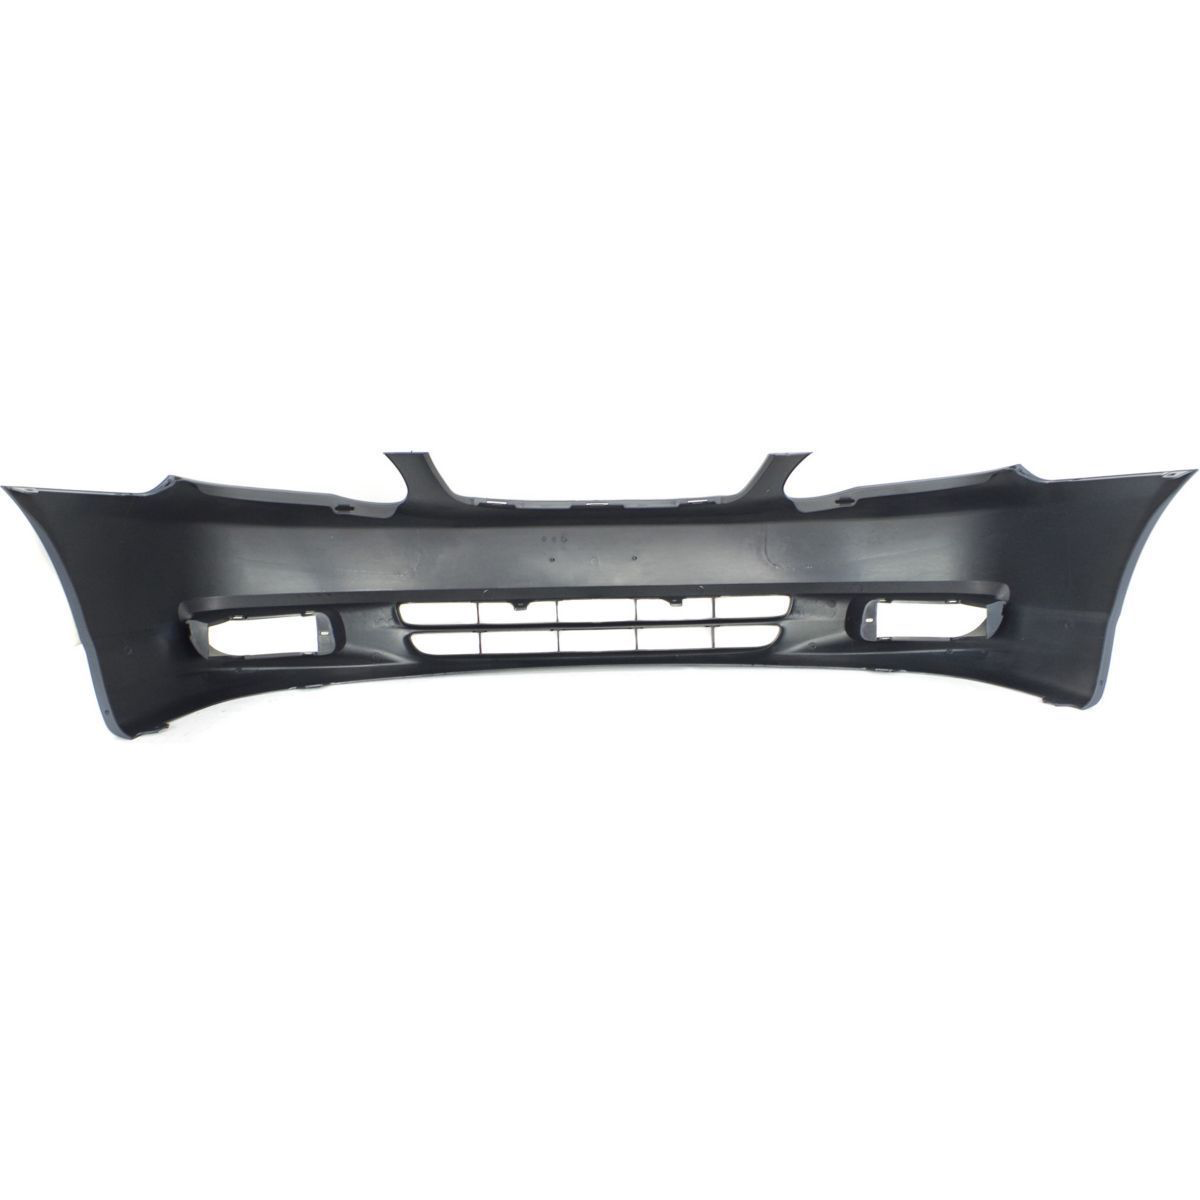 2003-2004 TOYOTA COROLLA Front Bumper Cover CE|LE Painted to Match